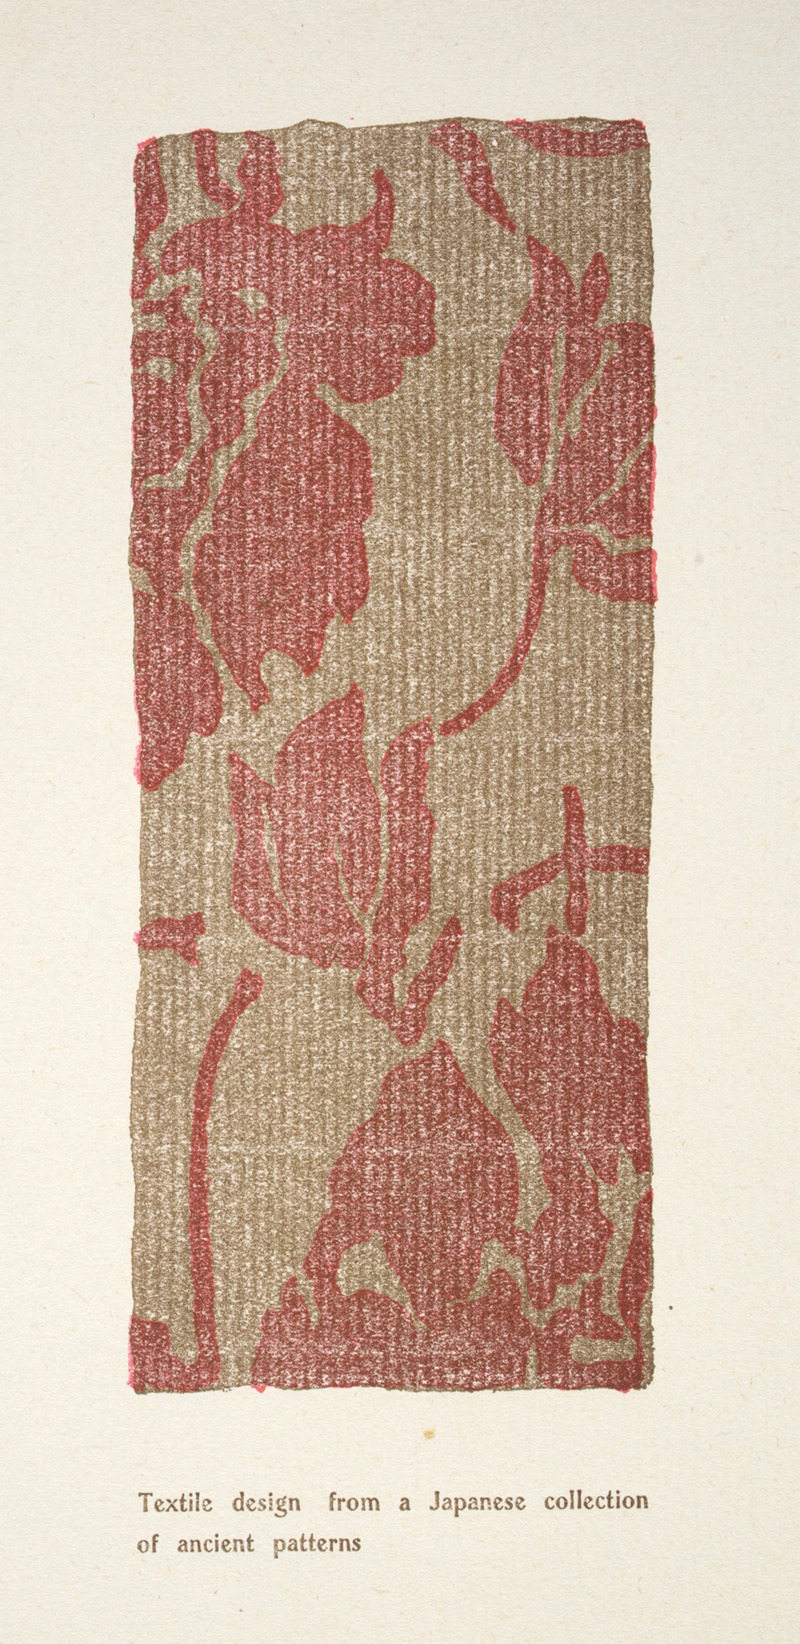 Arthur Wesley Dow - Ancient textile pattern, Japanese